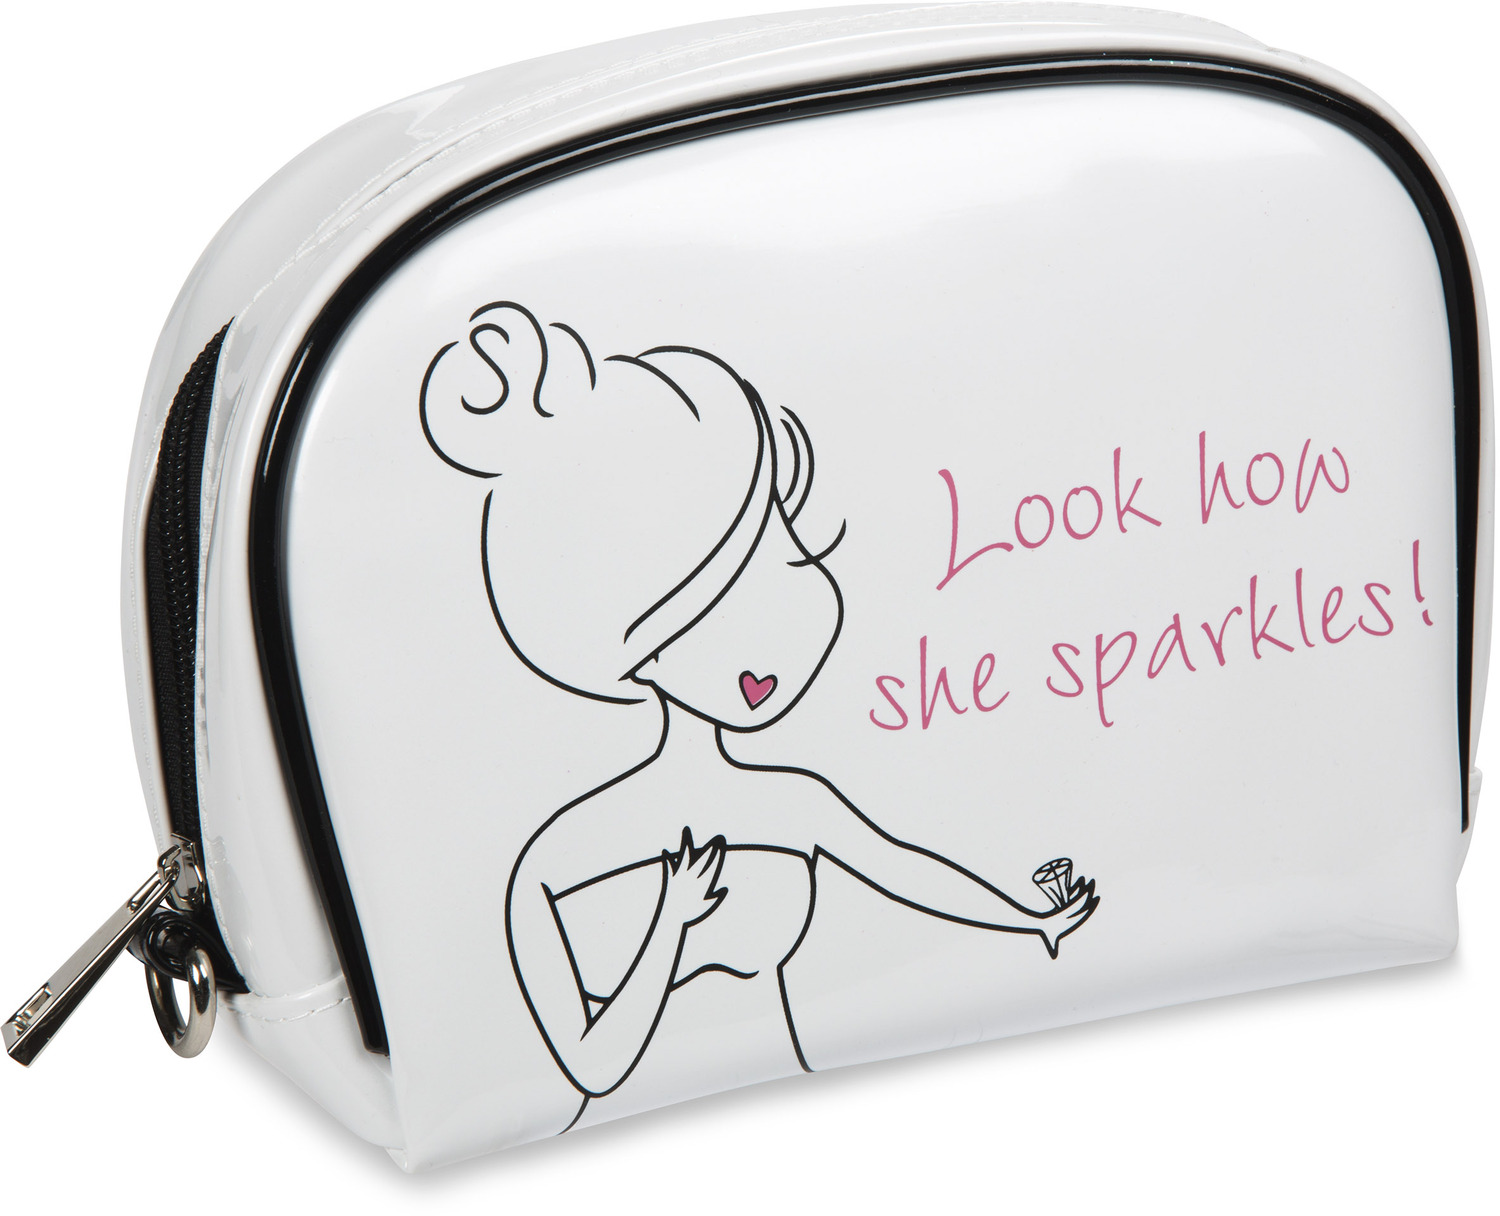 Look How She Sparkles! by philoSophies - Look How She Sparkles! - 7.5" x 5.5" Makeup Bag